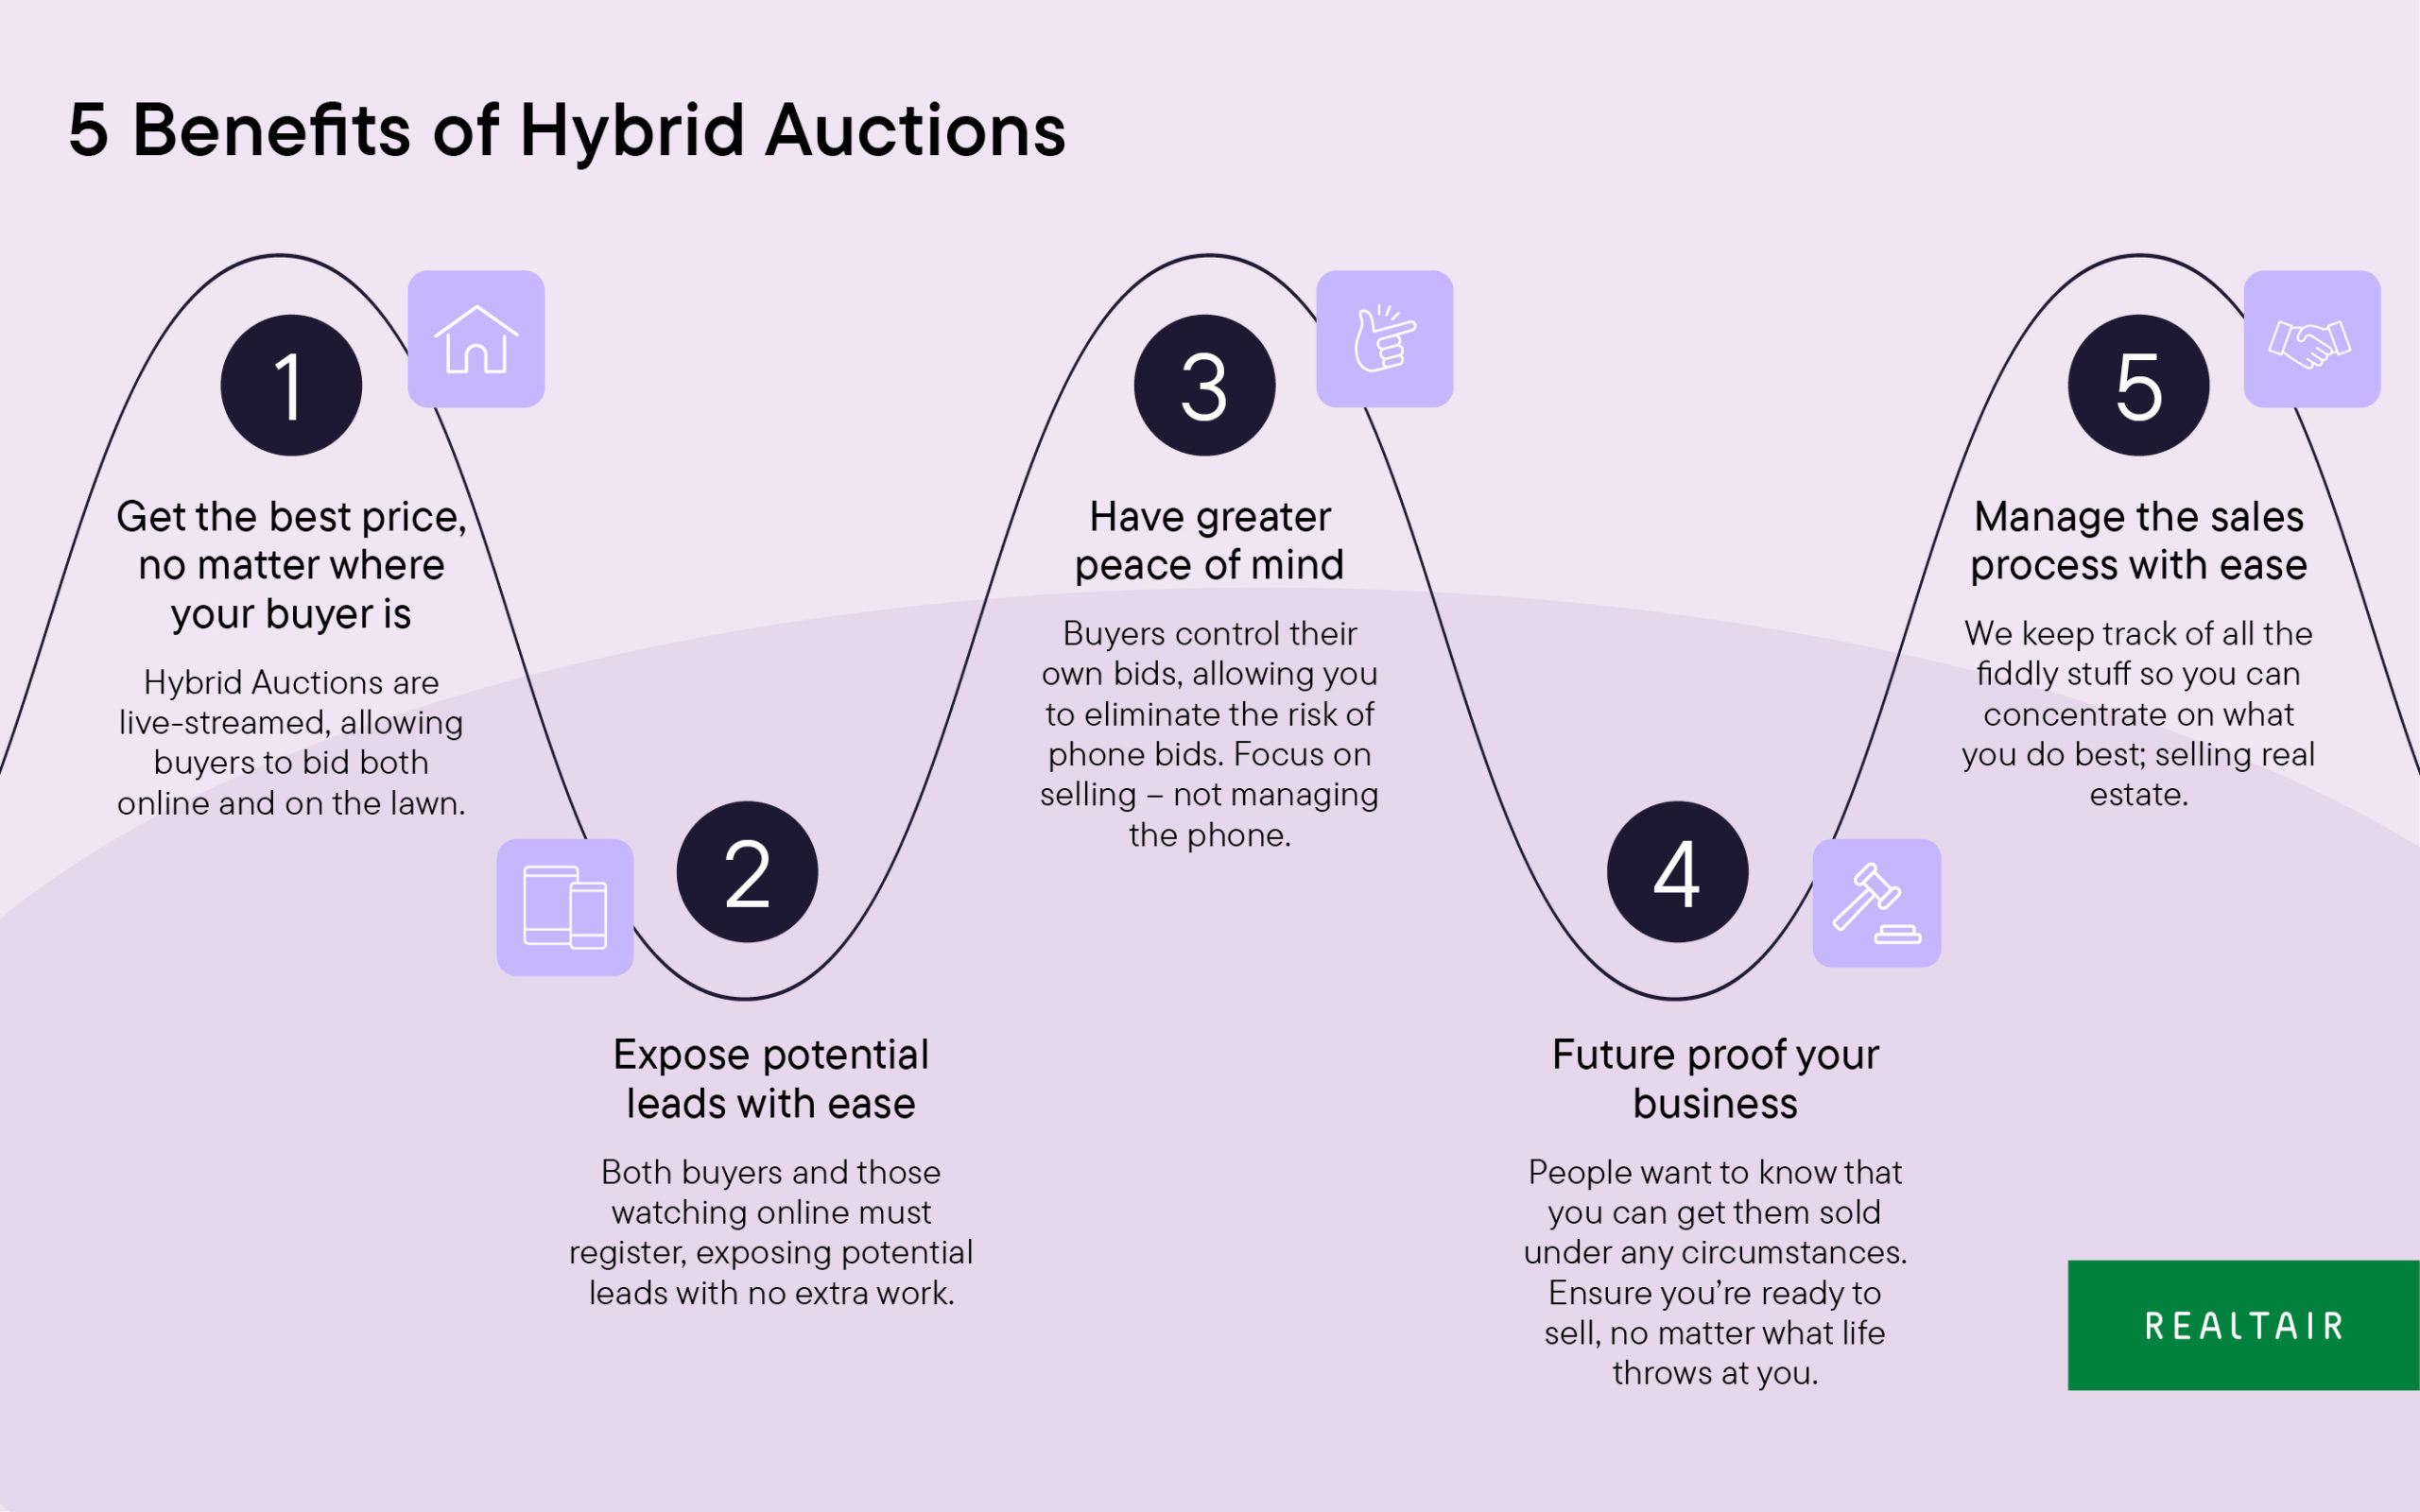 Five benefits to Hybrid Auctions.